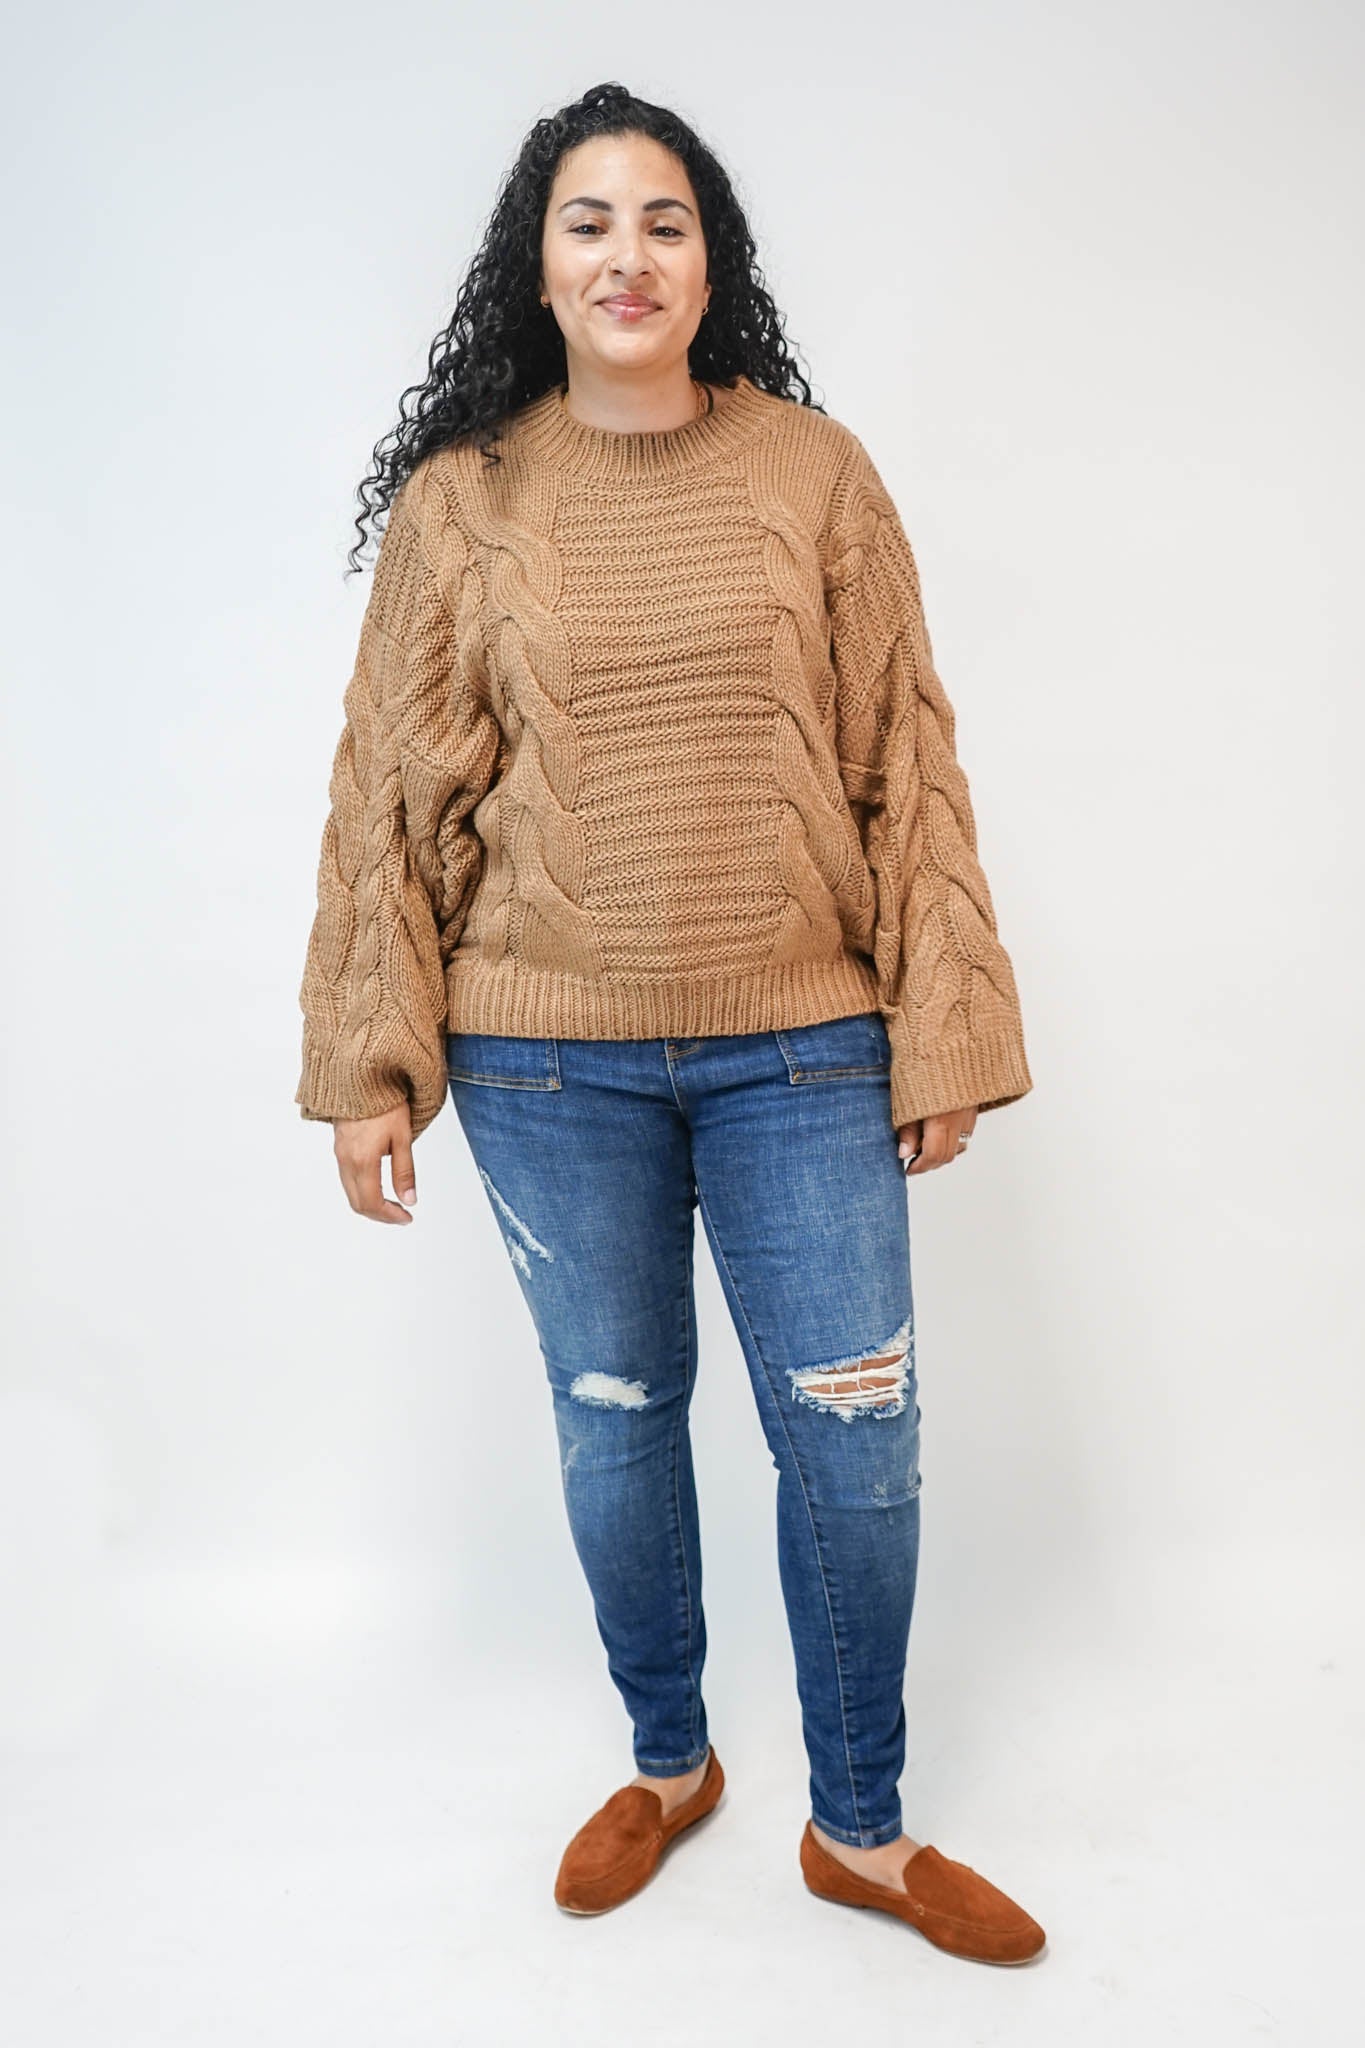 Mary Bell Sleeve Cable Knit Sweater in Camel